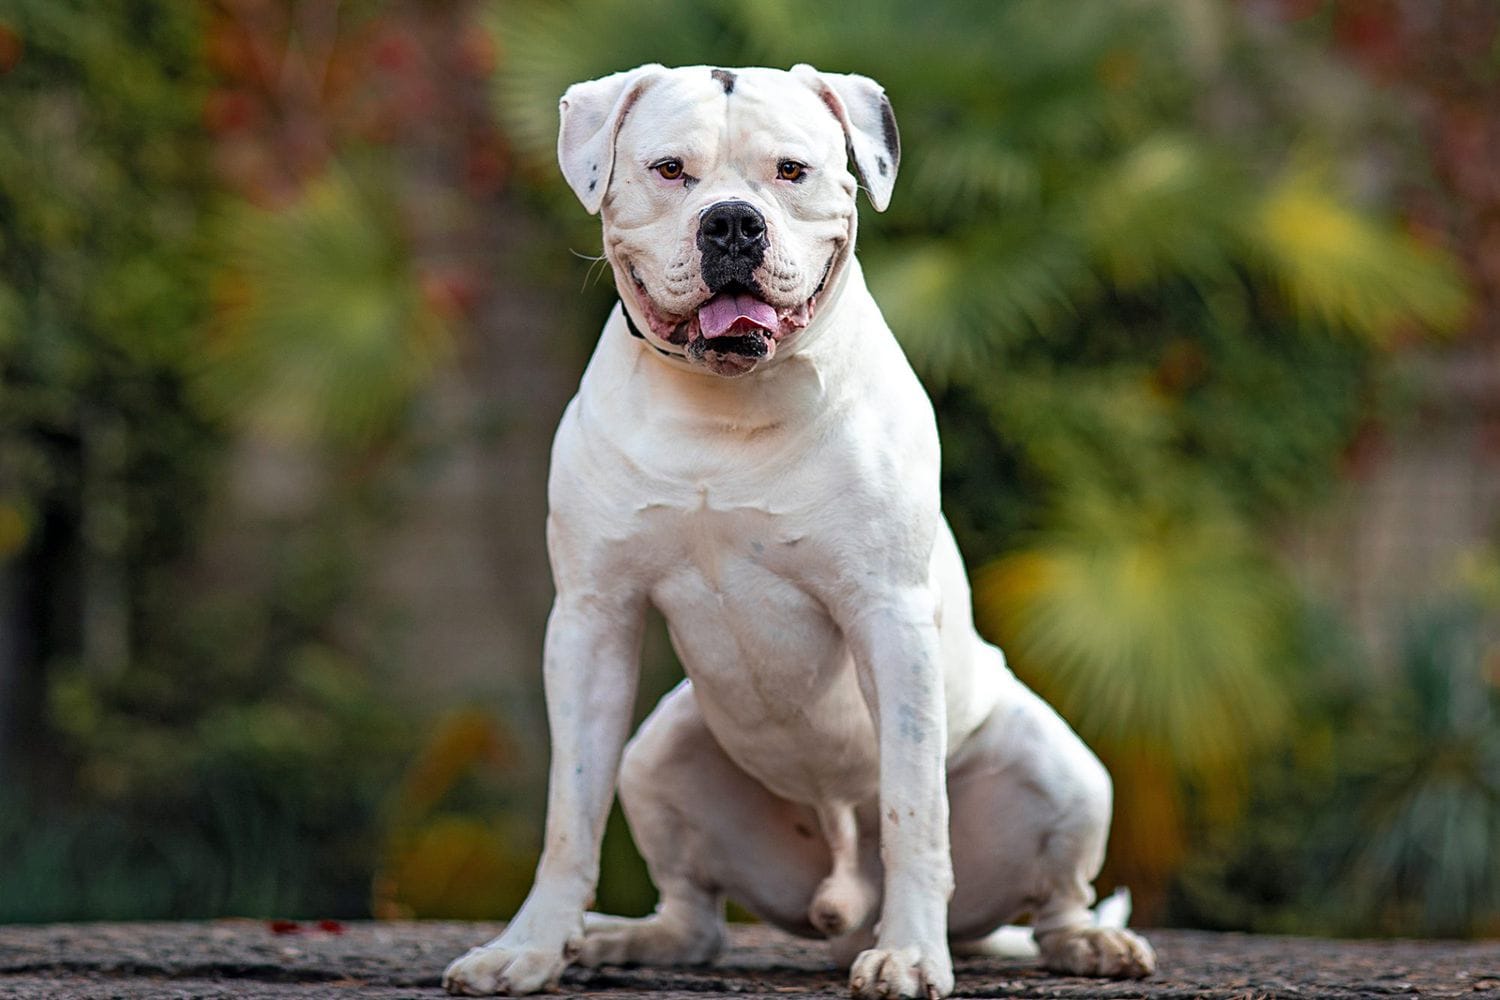 Can American Bulldogs Be Left Alone?